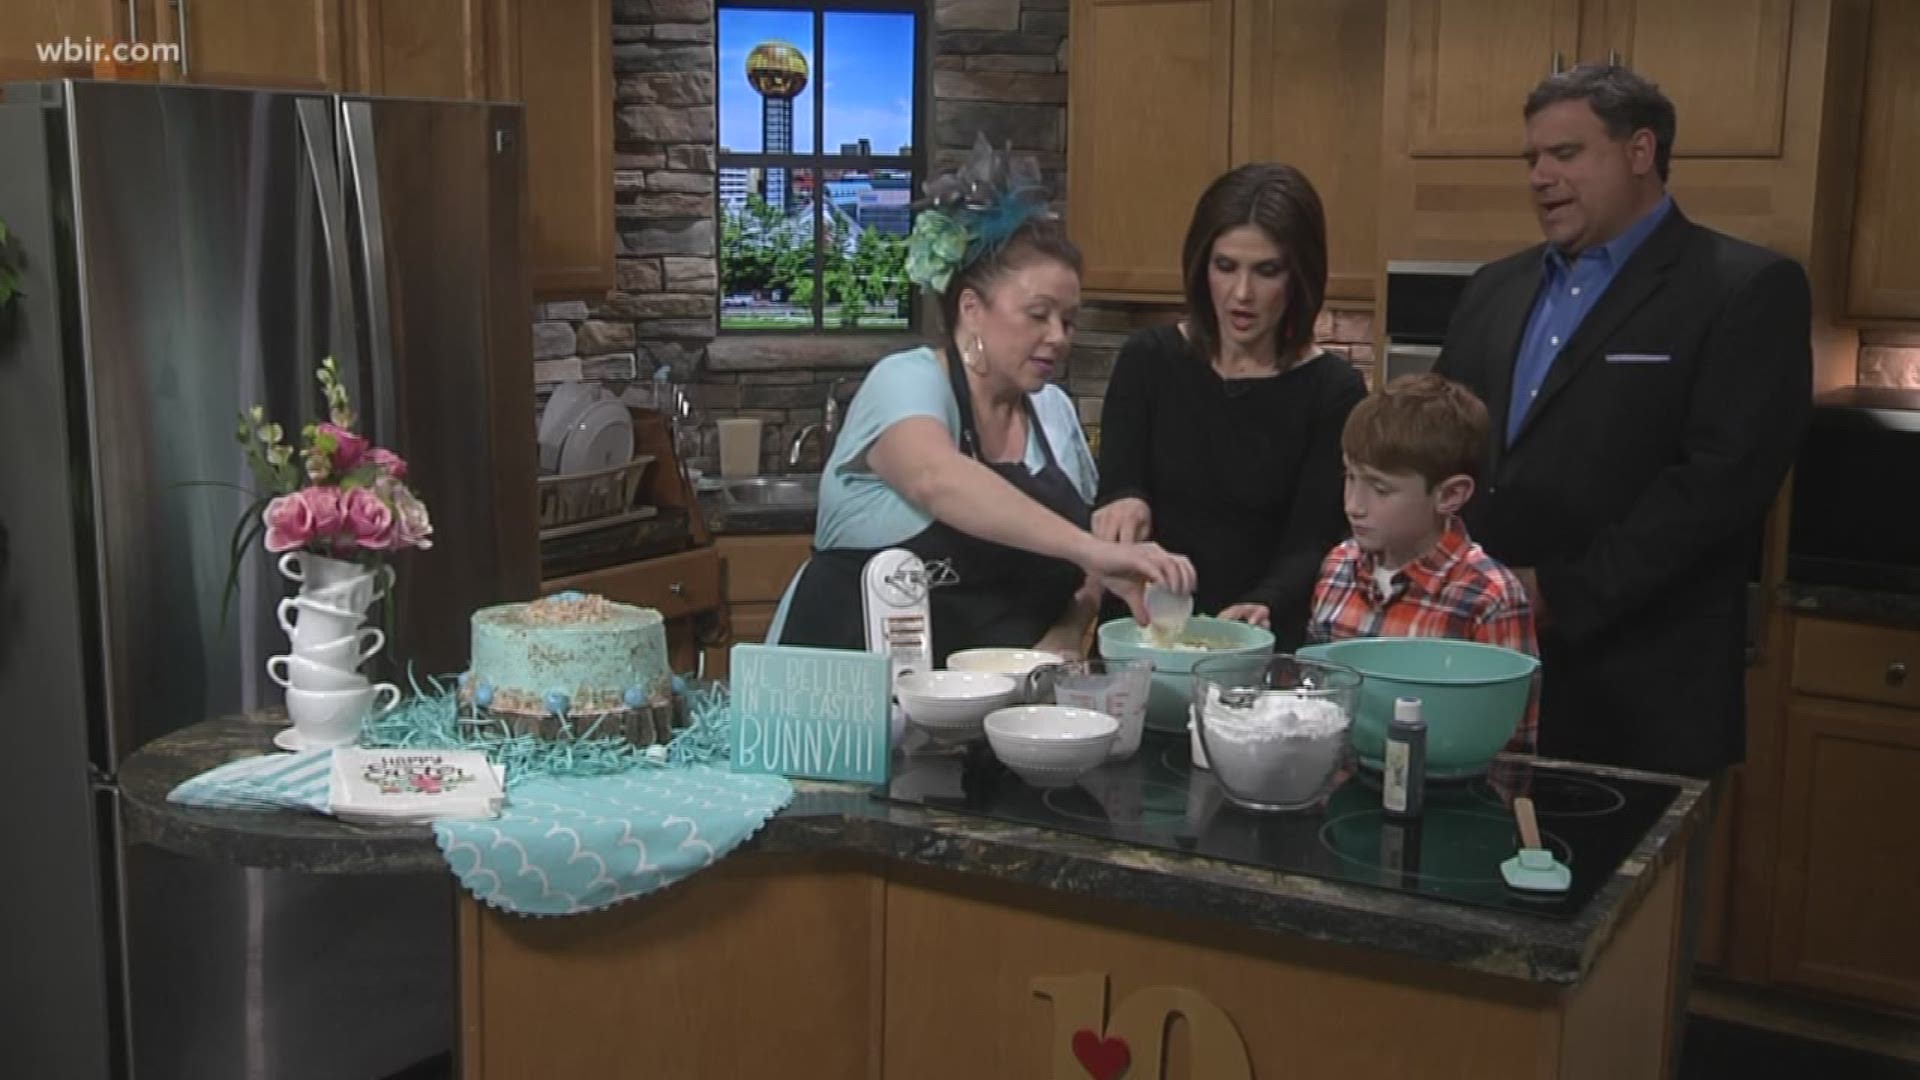 Deana Hurd from Lulu's Tea makes a beautiful cake that is perfect for spring and Easter.Lulu's Tea Room is located at 3703 W Beaver Creek Drive in Powell, lulustearoom.com,  (865) 947-5858March 20, 2018-4pm